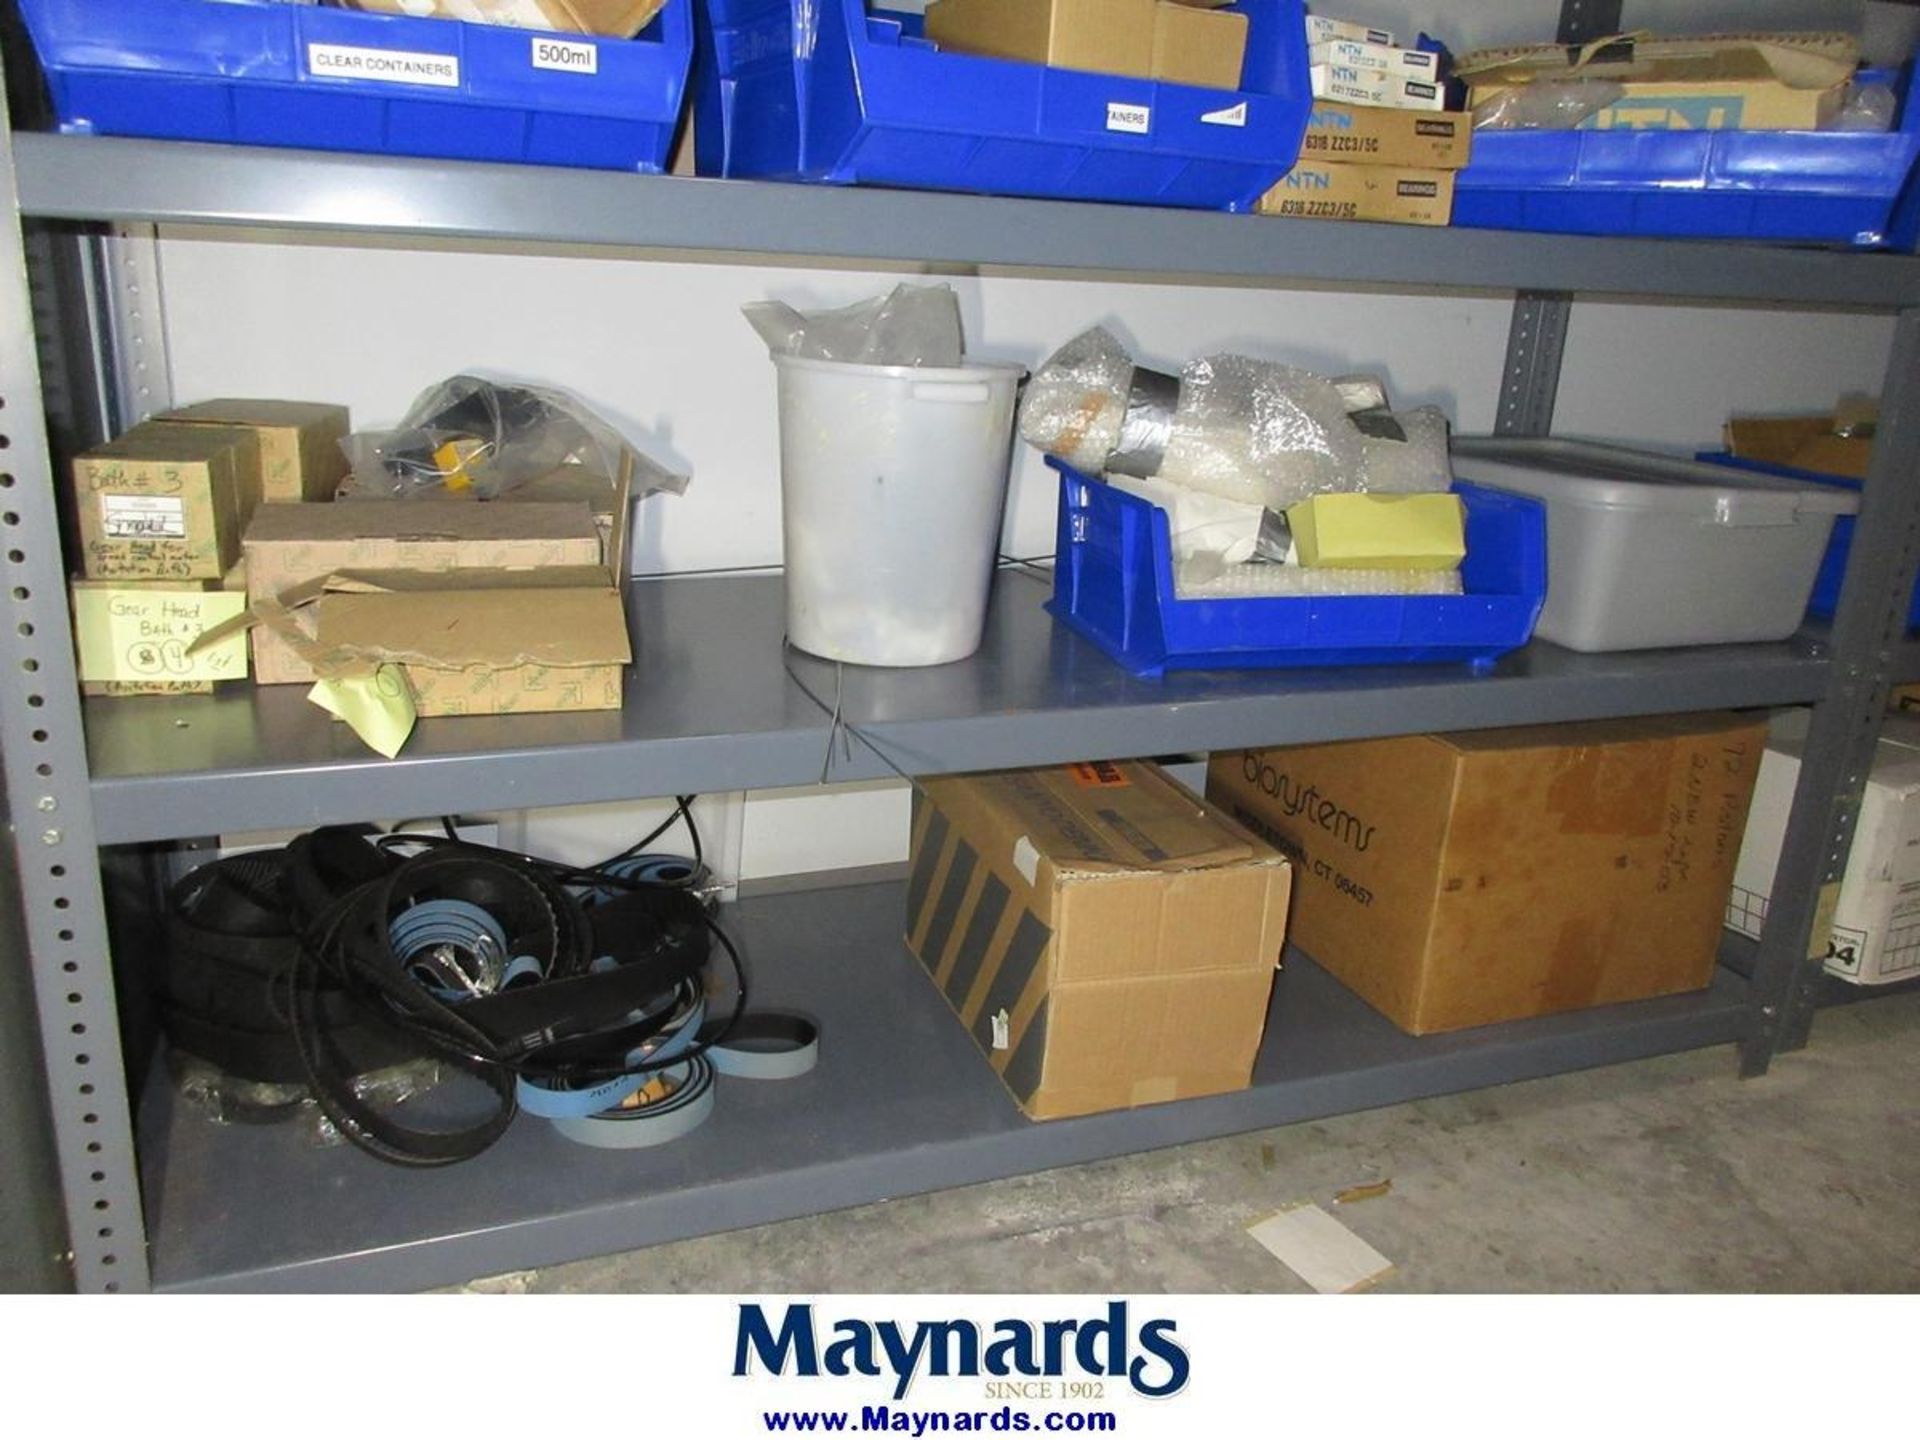 Contents of Web Storage Room - Image 11 of 24